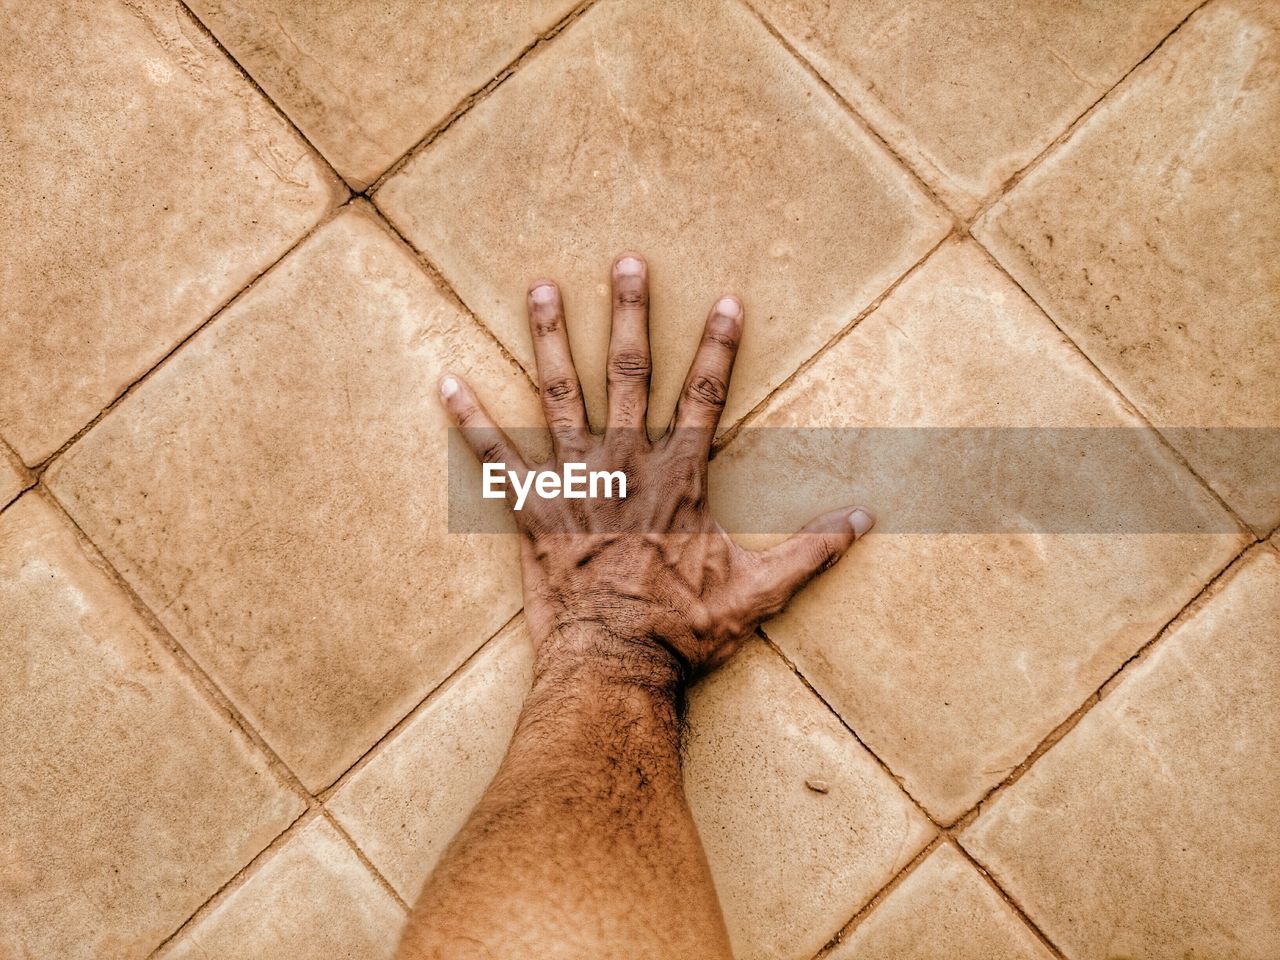 Cropped image of hand on tiled floor